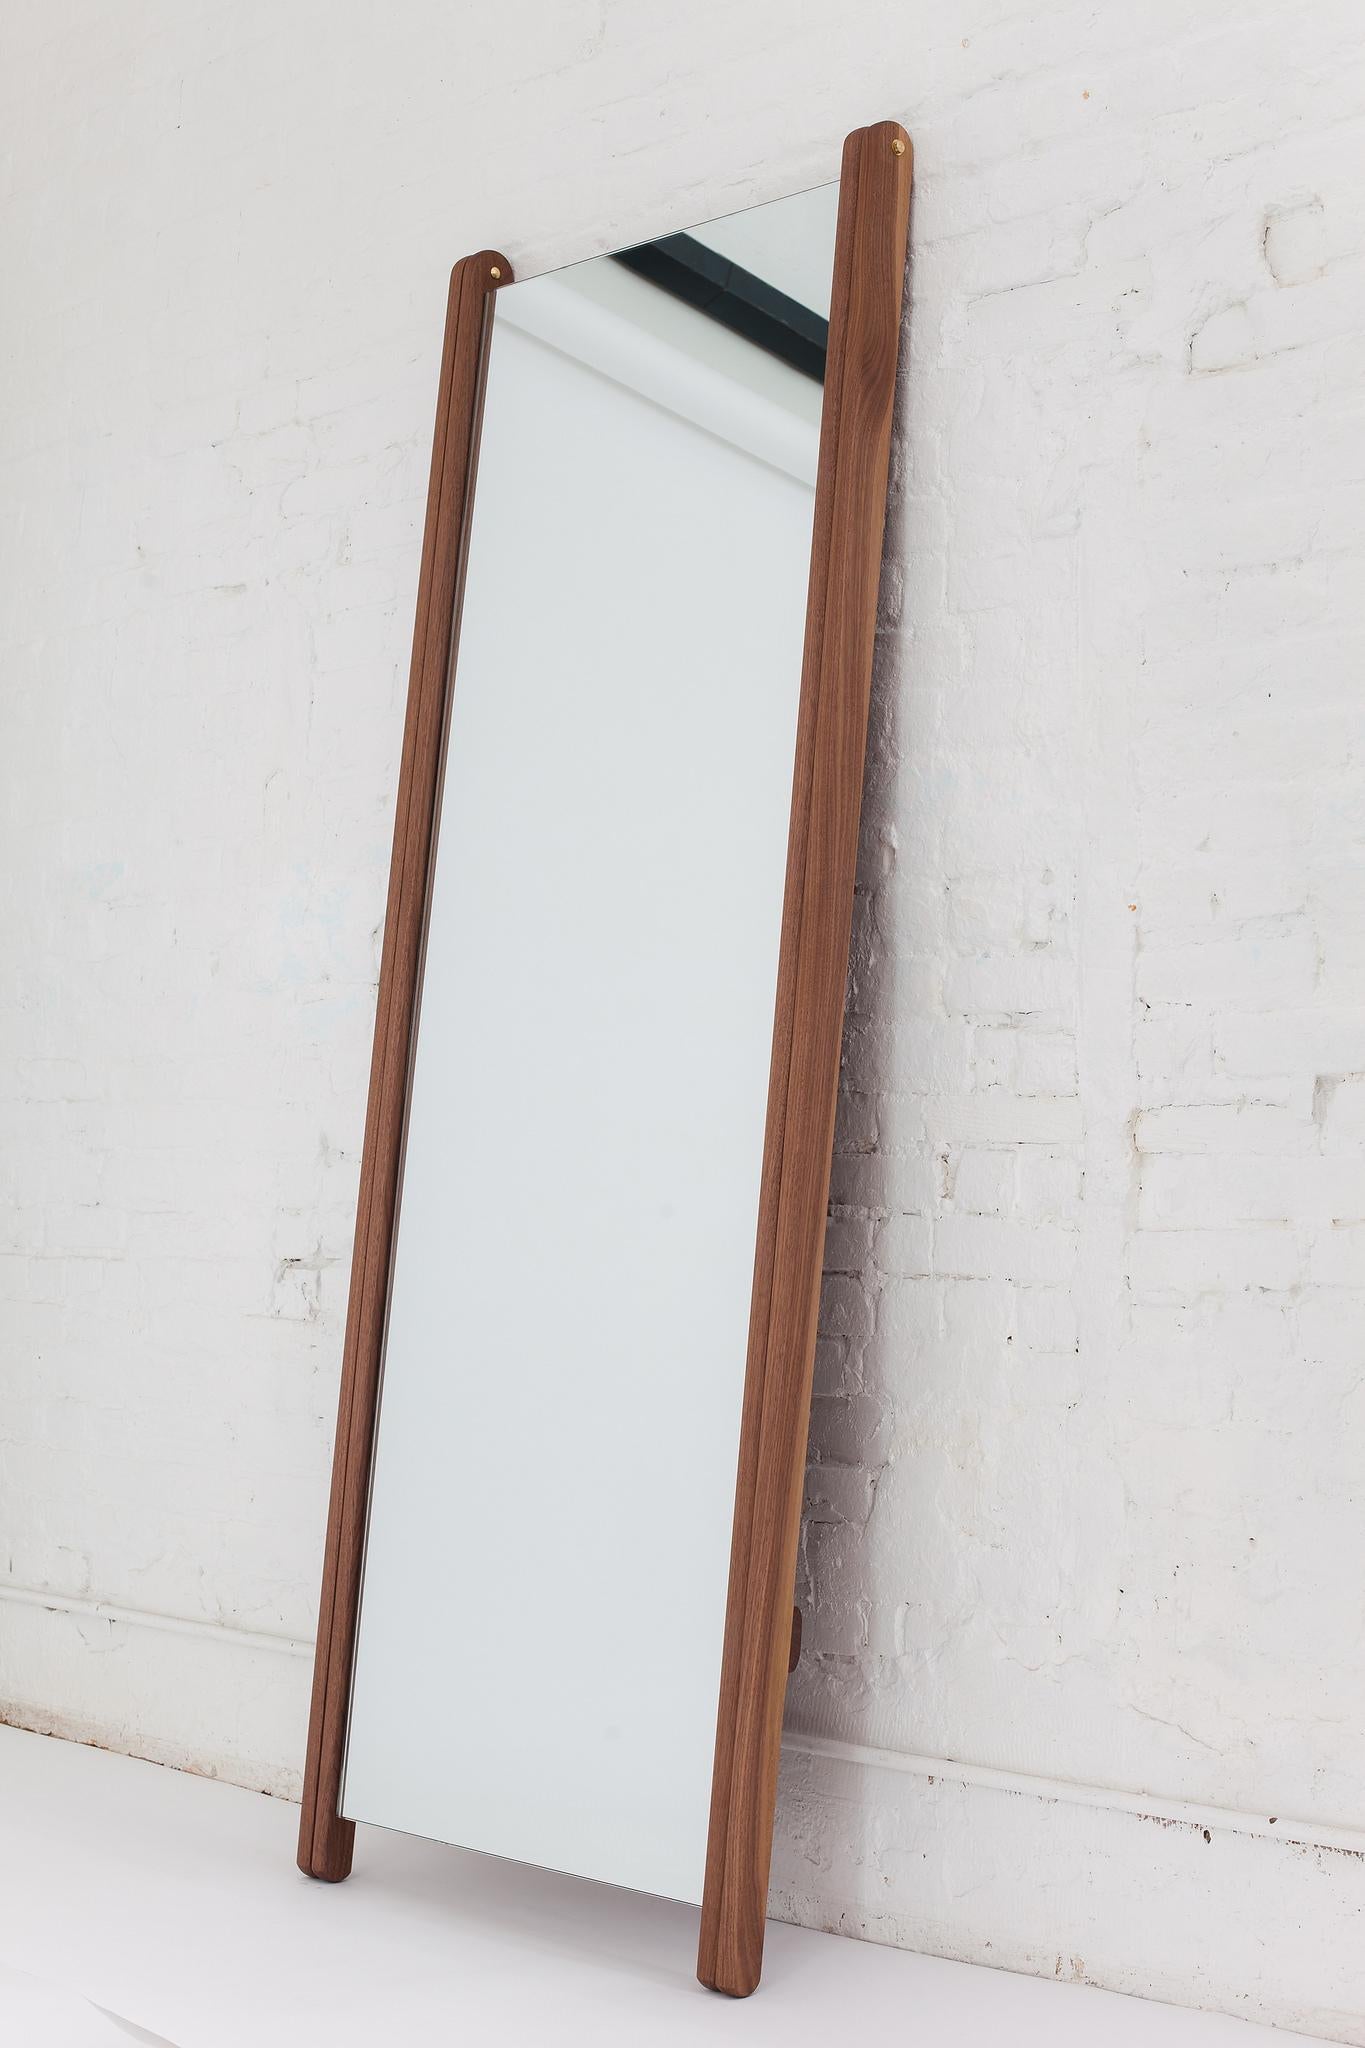 Large and luxurious, the Libertine mirror stands lightly on its tapered legs. Leave it open in the ‘compass’ position, or fold it flat to lean against the wall for a smaller footprint. A strong backing prevents the mirror from experiencing any